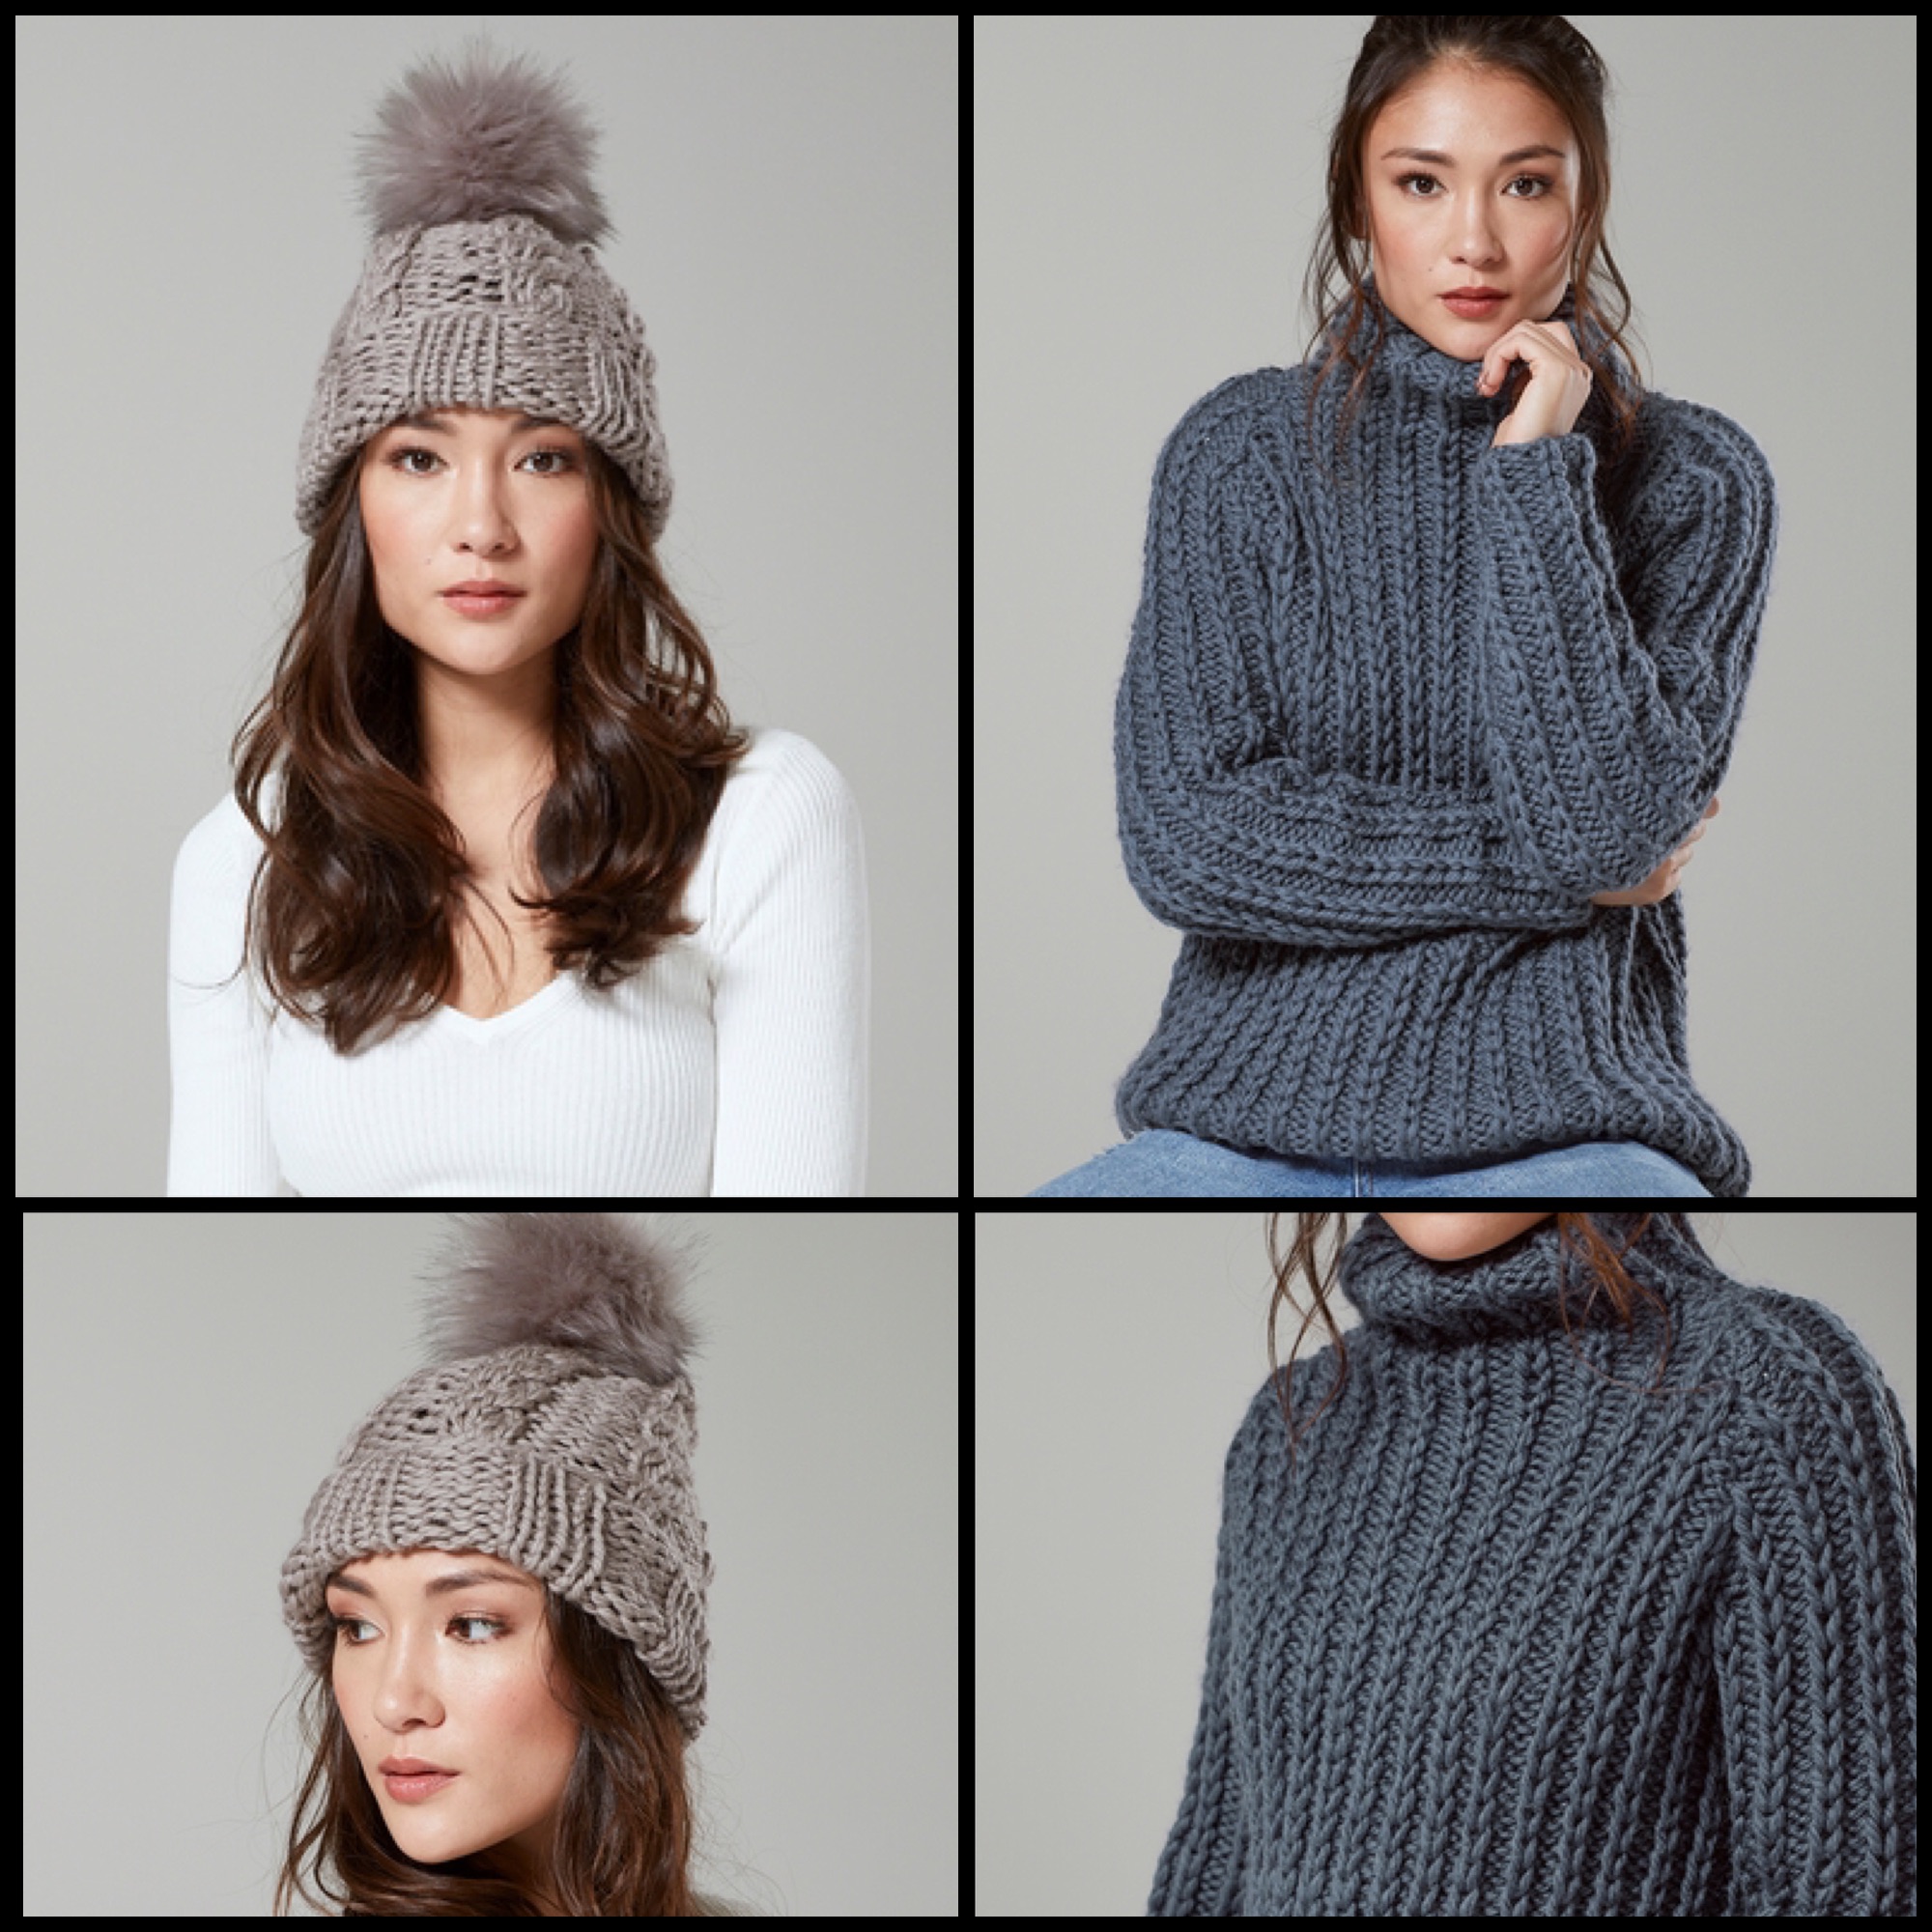 mode at rowan big wool textures book pattern wooly hat sweater